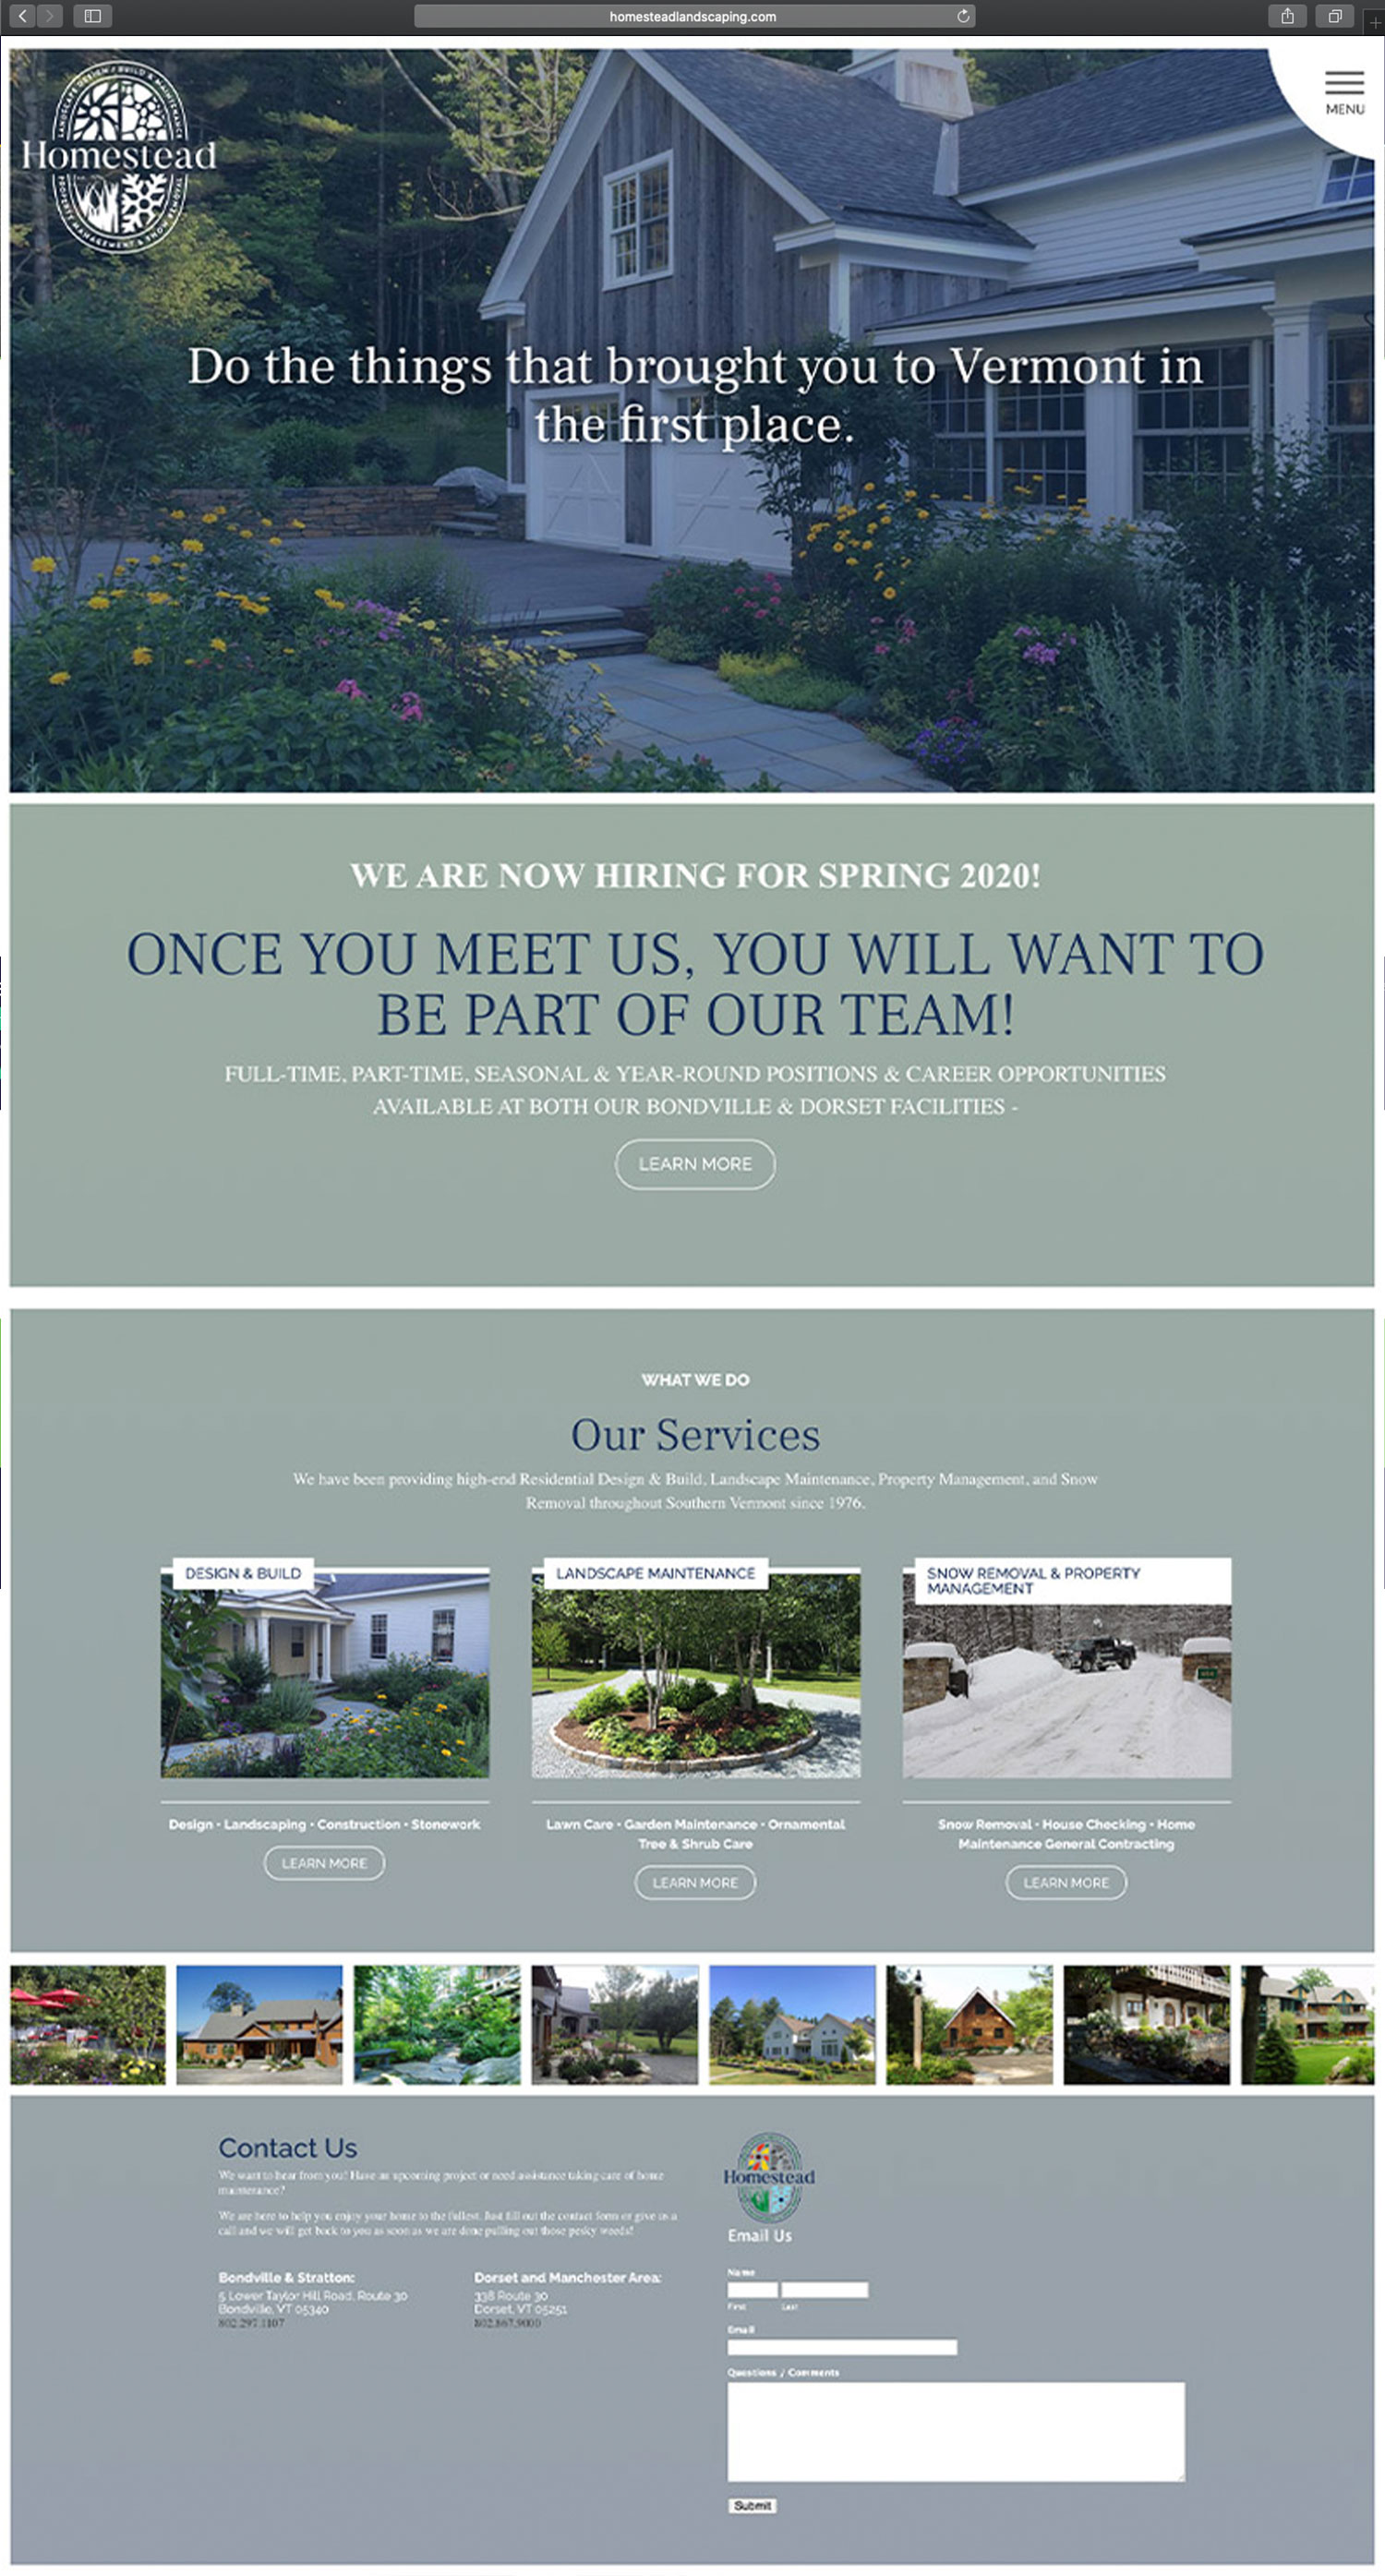 Website design and website development for Homestead Landscaping - homepage view.